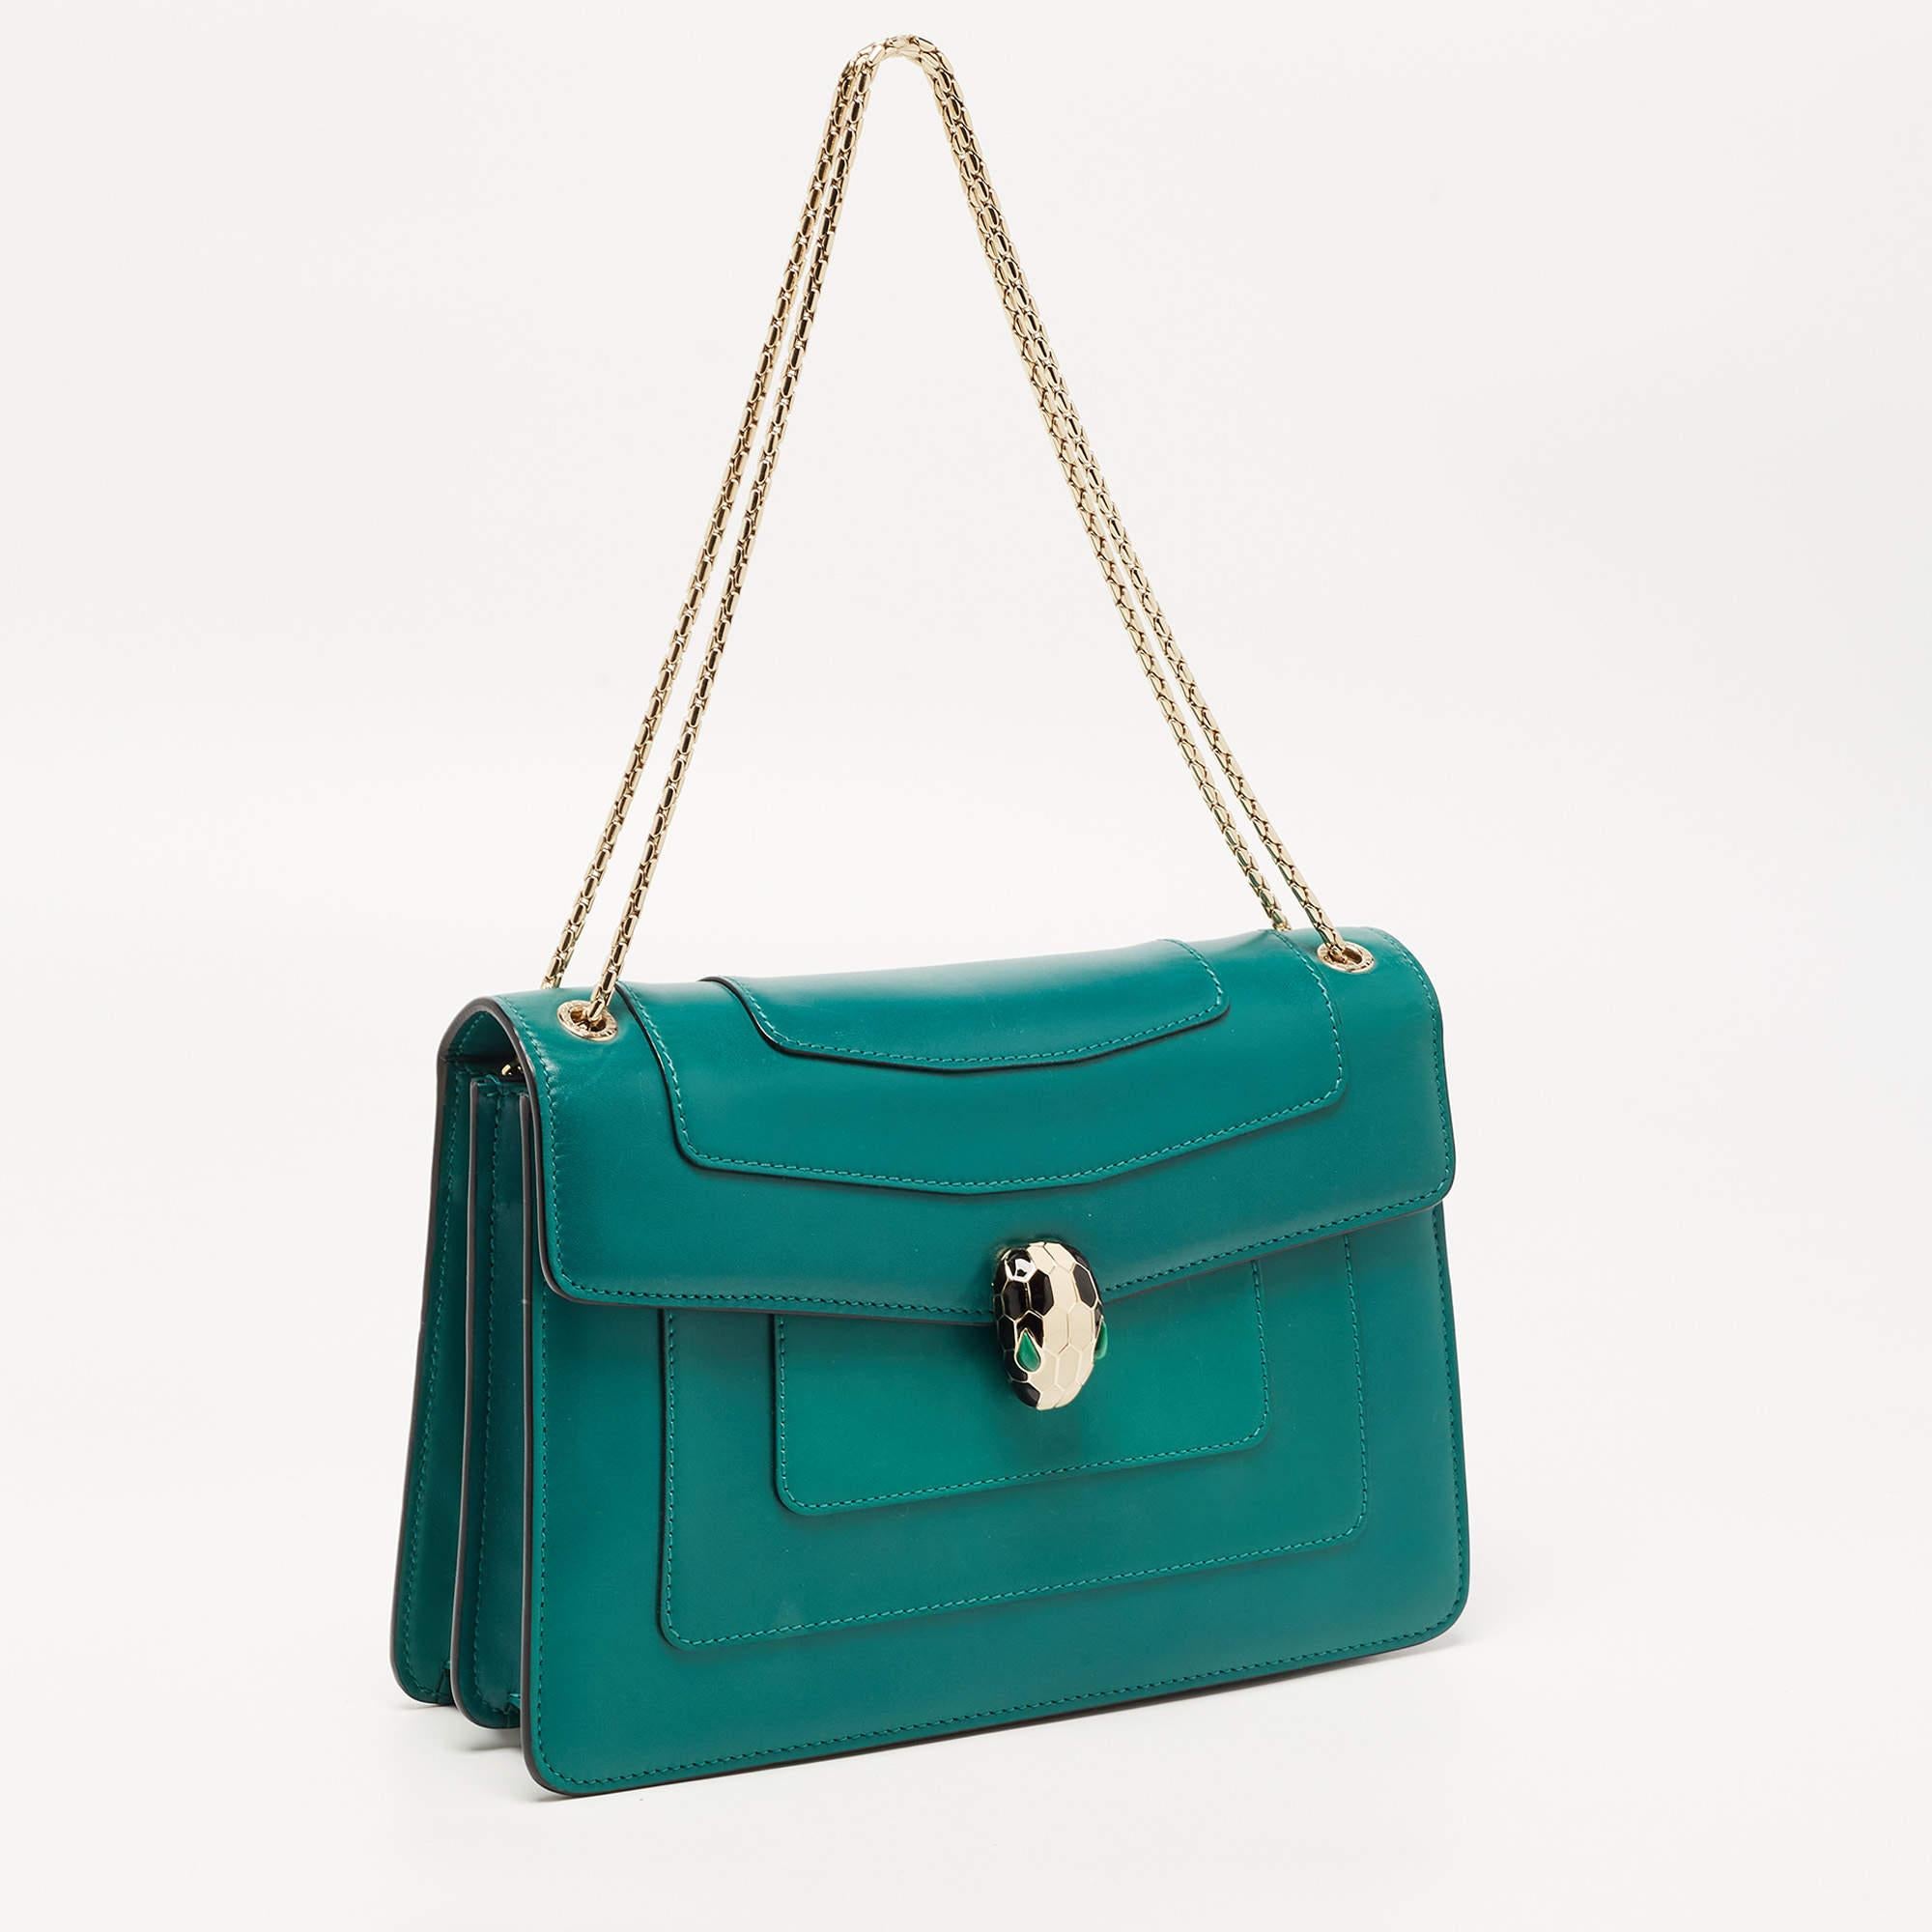 Most designs from Bvlgari with their striking elements, pay tribute to the Roman roots, and this bag is no different. Made from leather, it is an accessory of utility and luxury. Lined with fabric and leather, the interior has enough room to